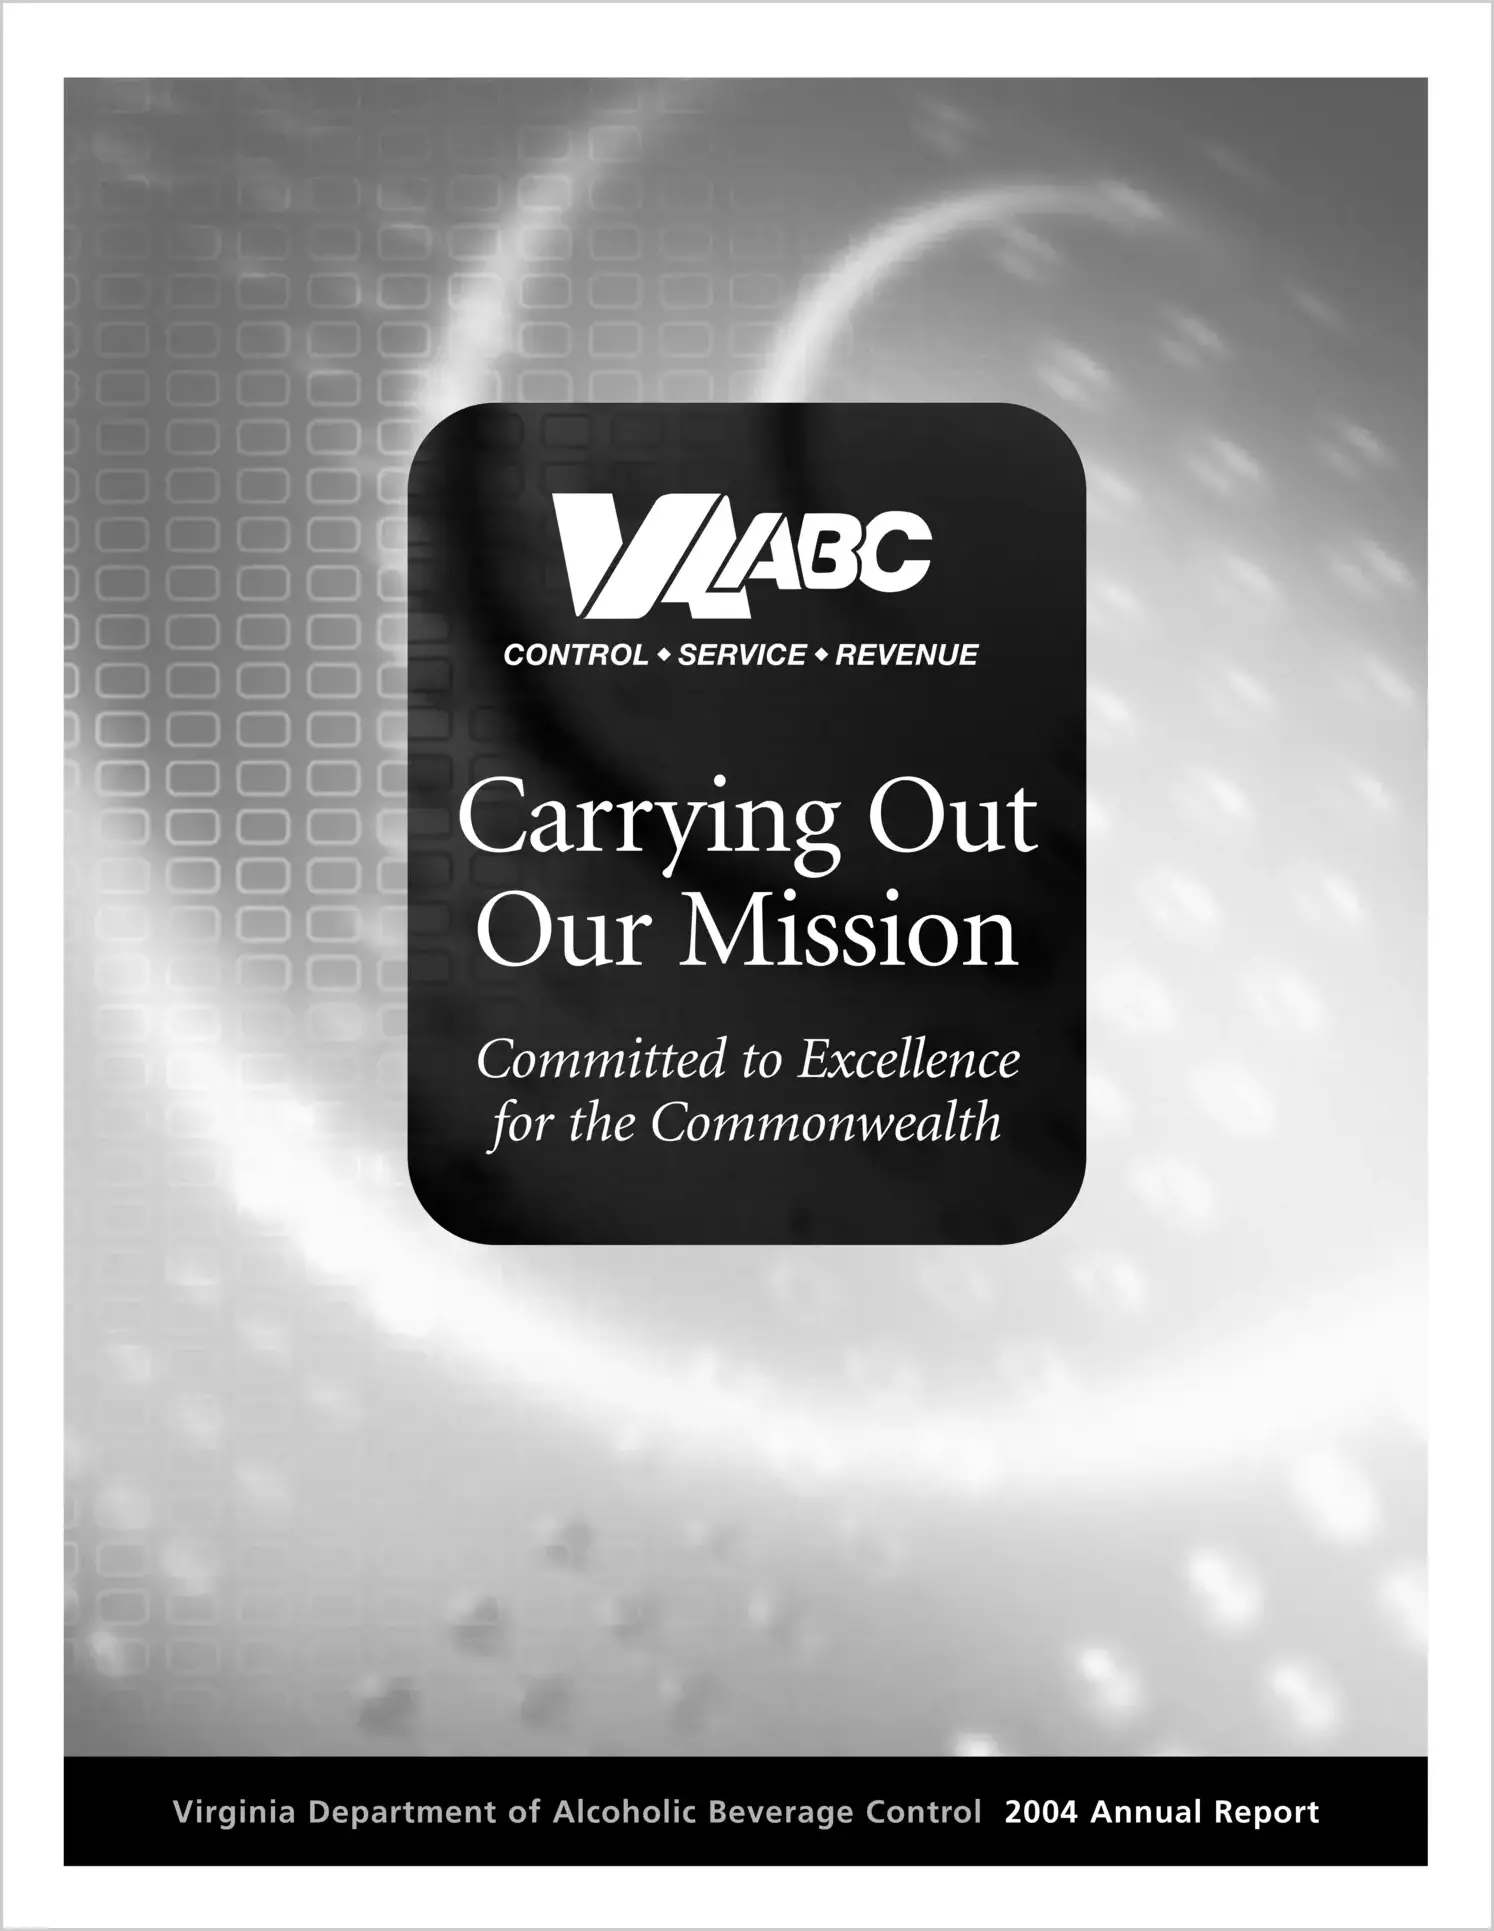 Department of Alcoholic Beverage Control Annual Report 2004